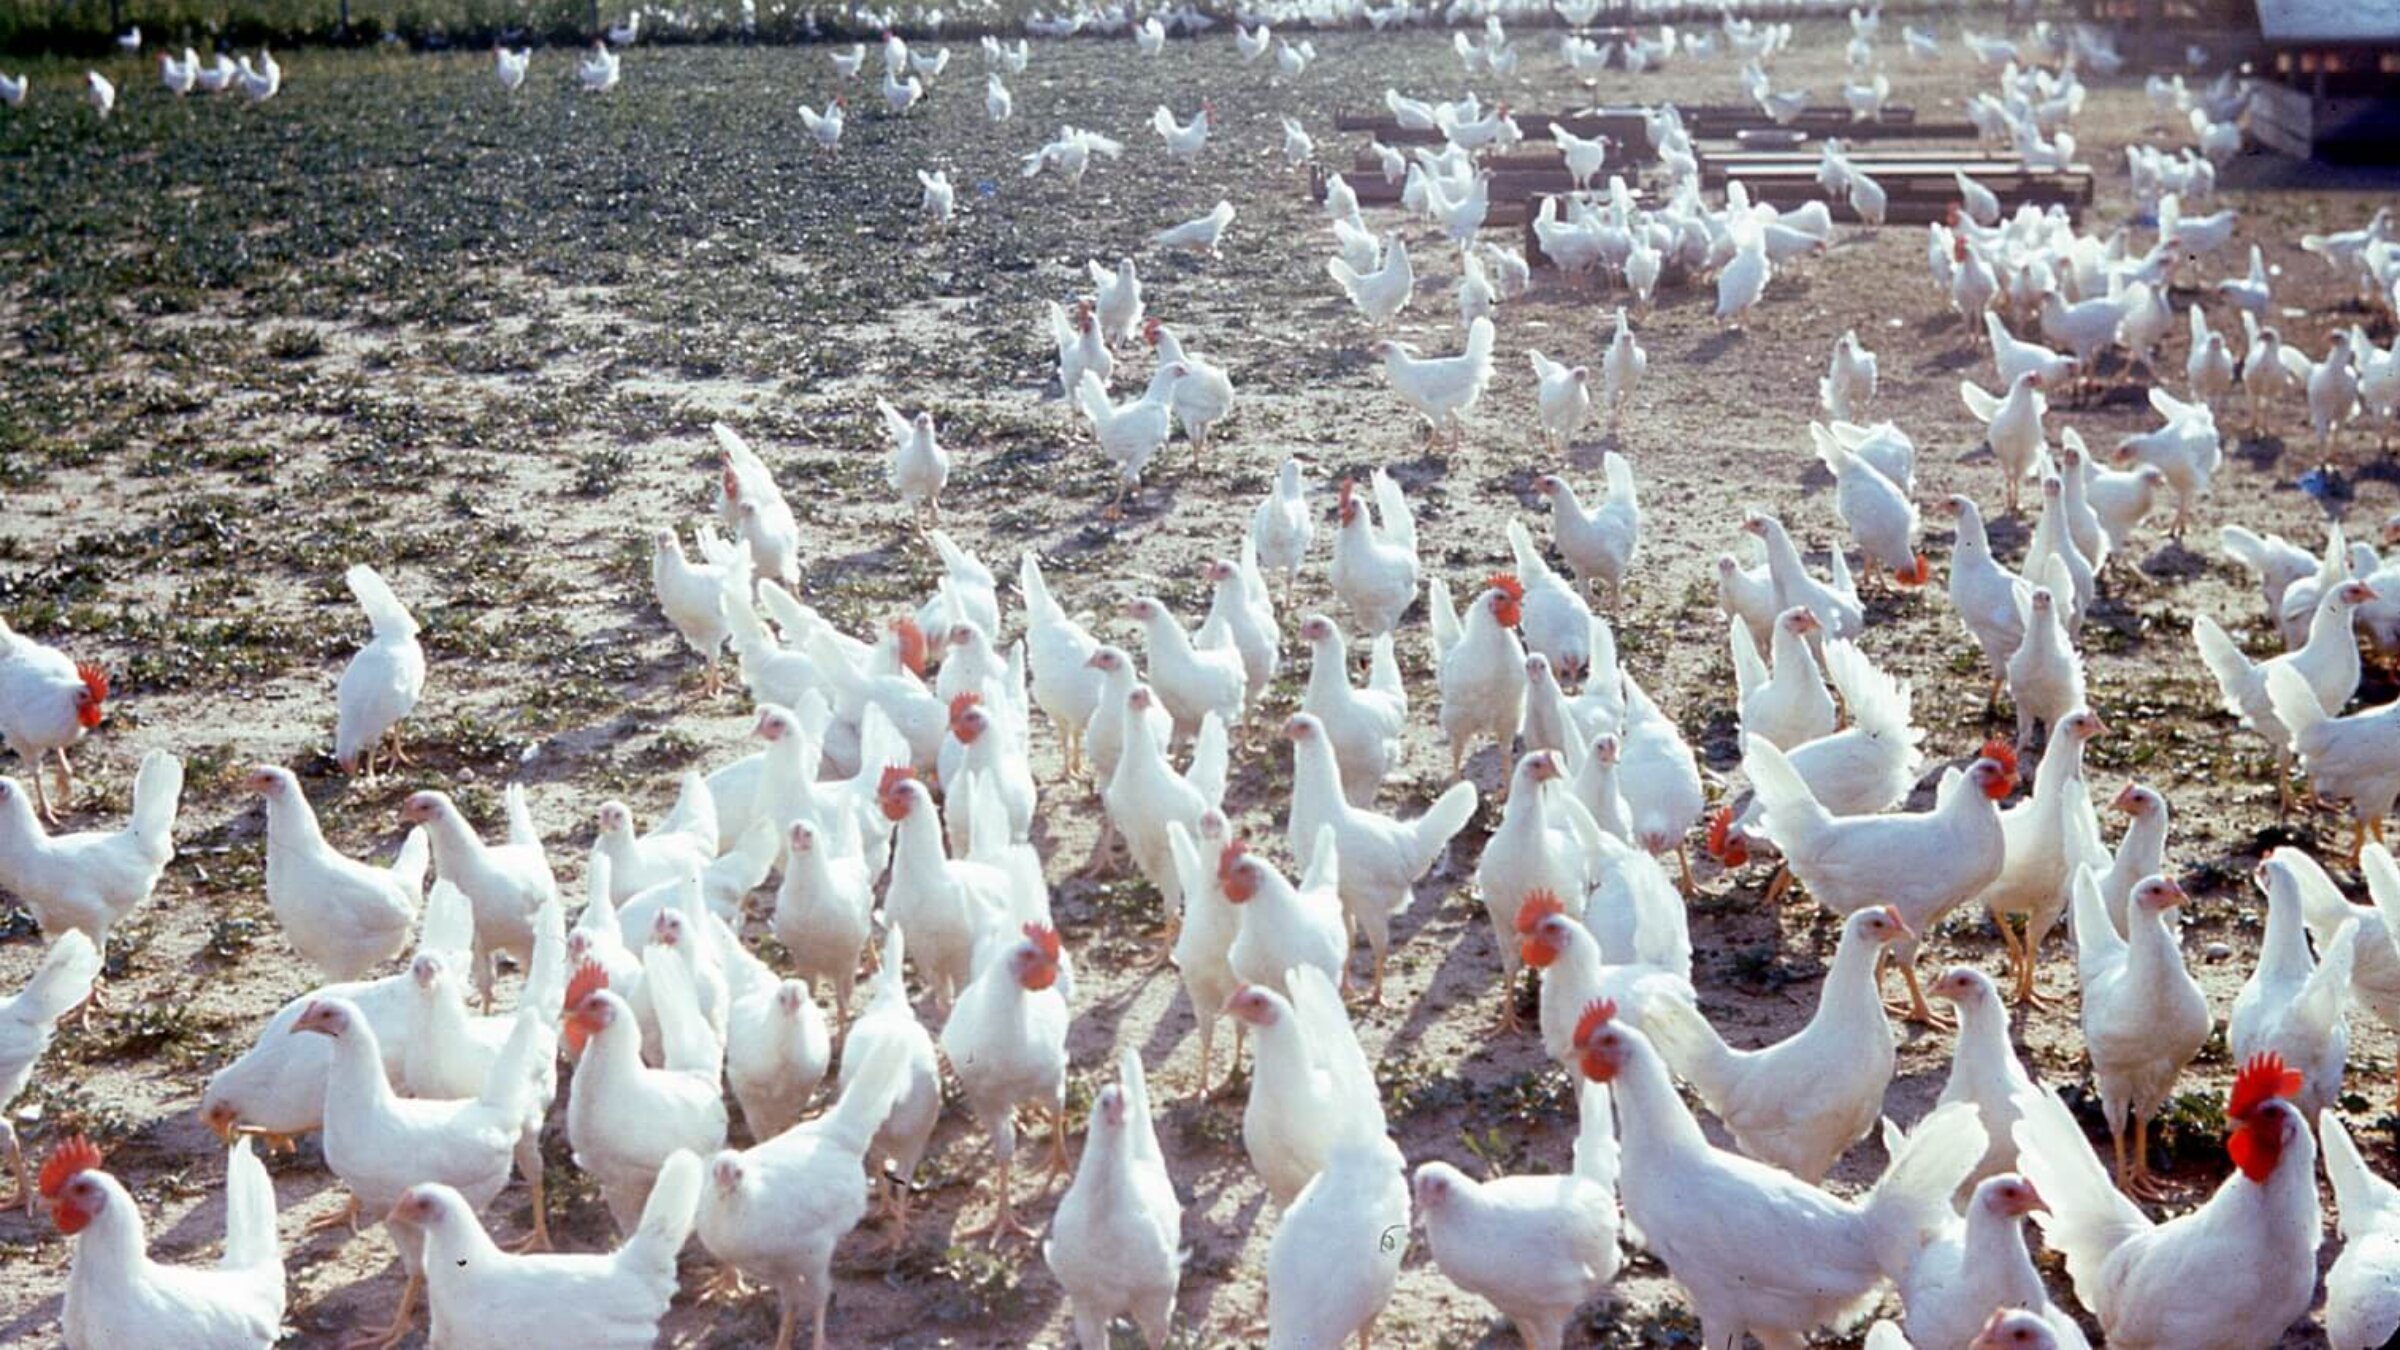 Family-owned poultry farm in Vineland, New Jersey in the 1950s